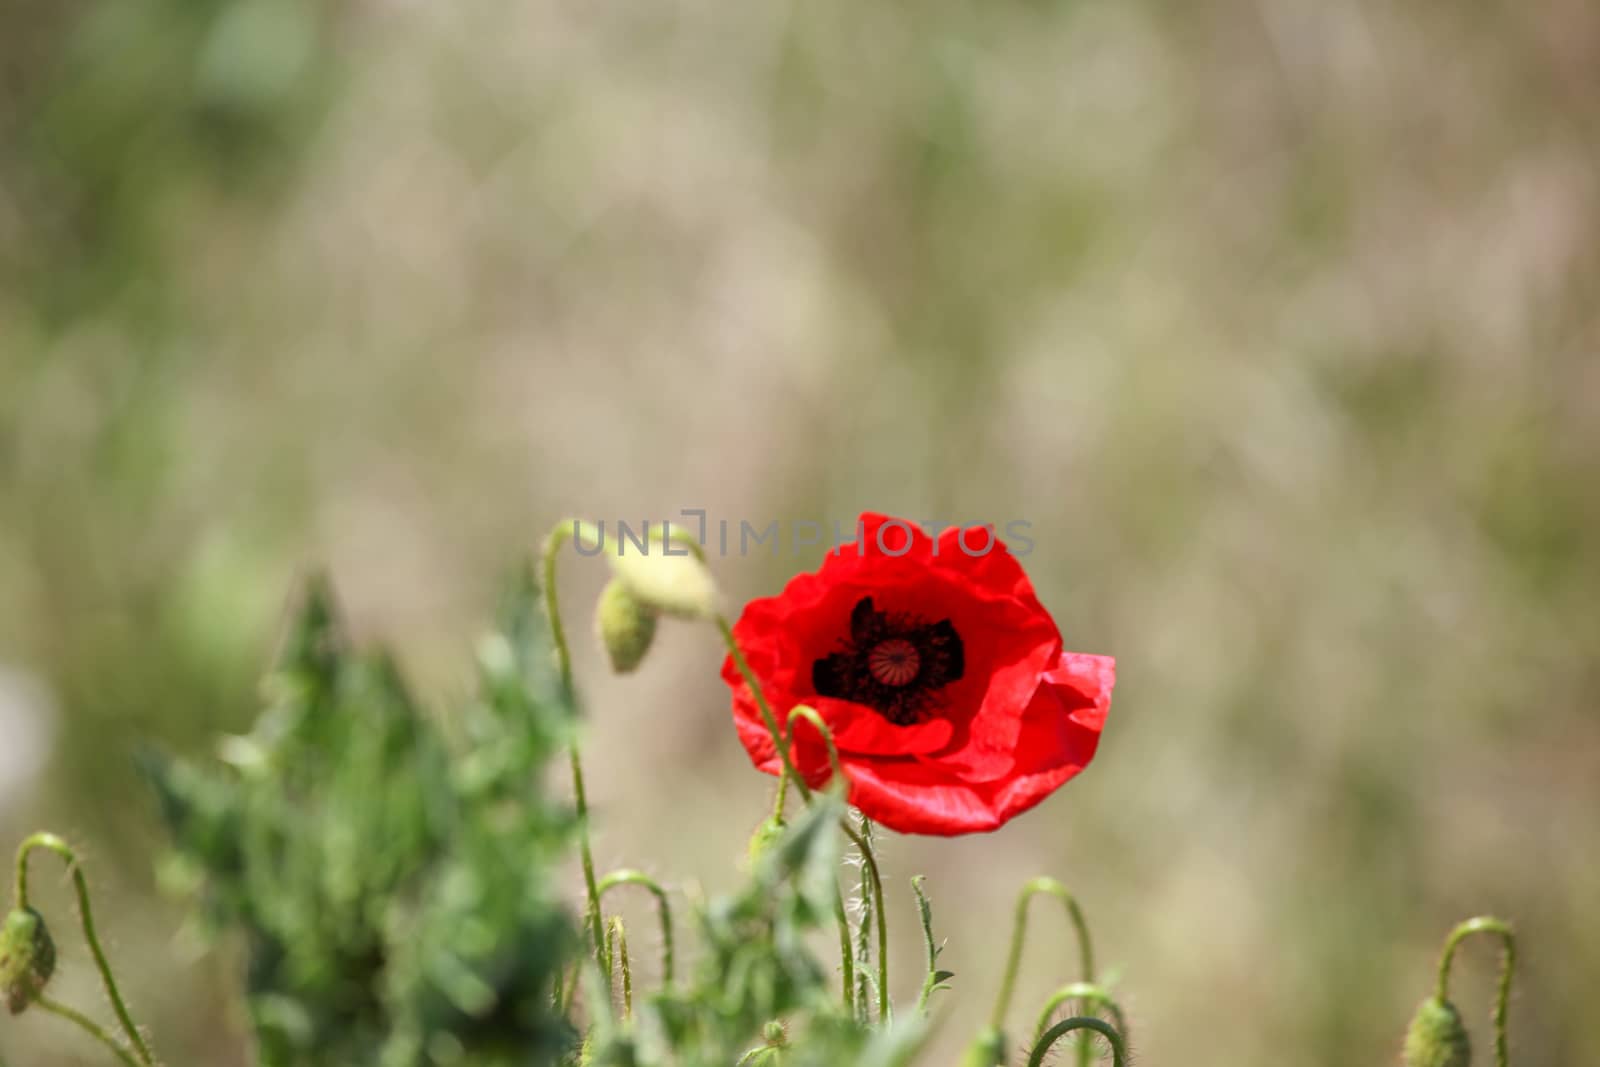 A Poppy Is A Flowering Plant In The Subfamily Papaveroideae Of The Family Papaveraceae.